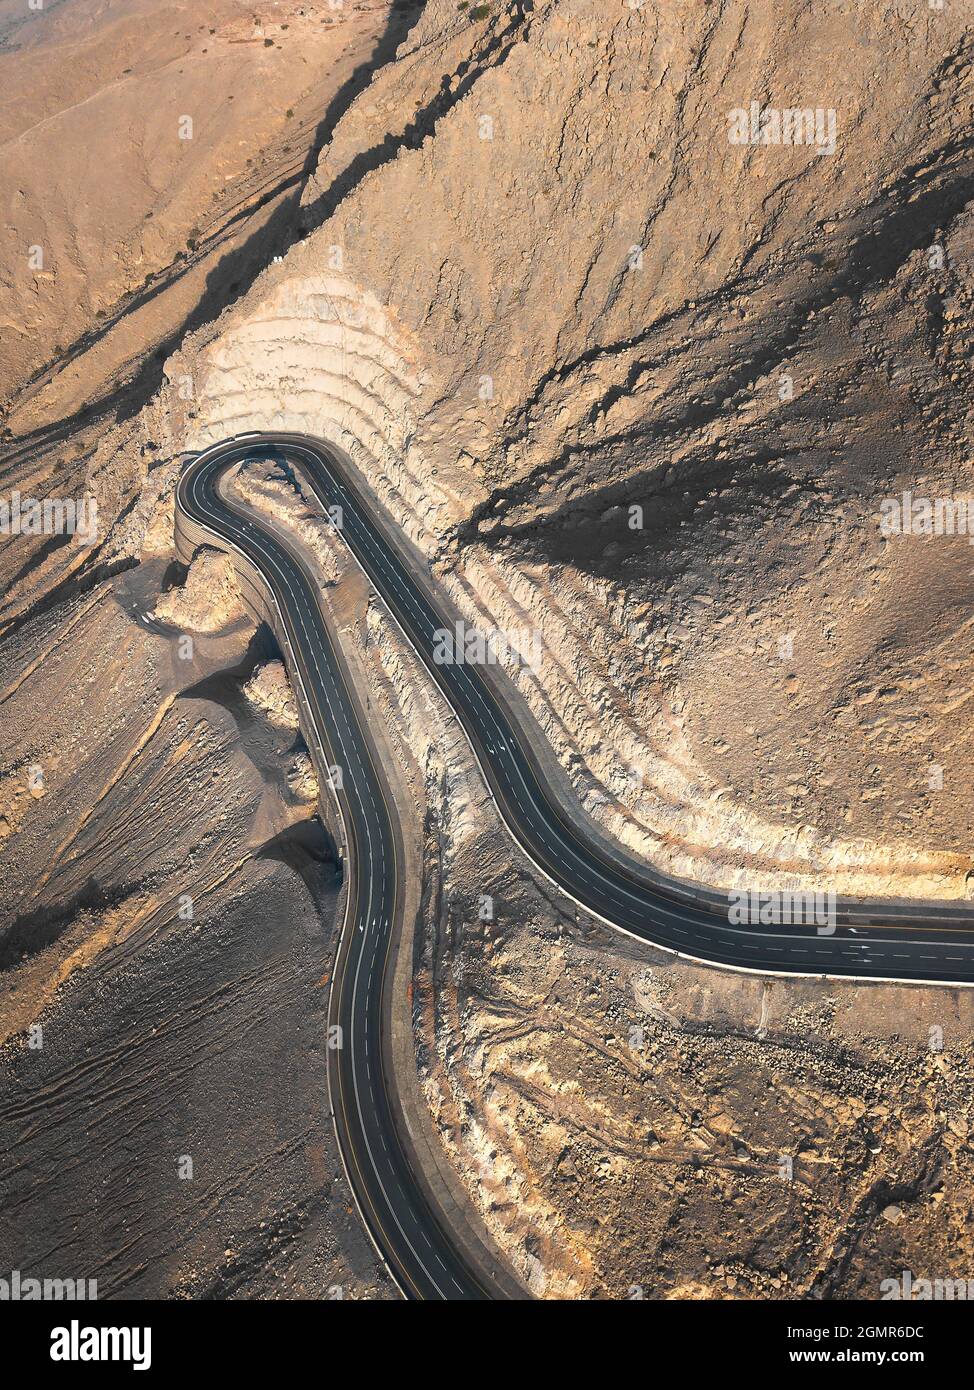 Aerial view of Jebel Jais mountain desert highway road surrounded by sandstones in Ras al Khaimah emirate of the United Arab Emirates Stock Photo